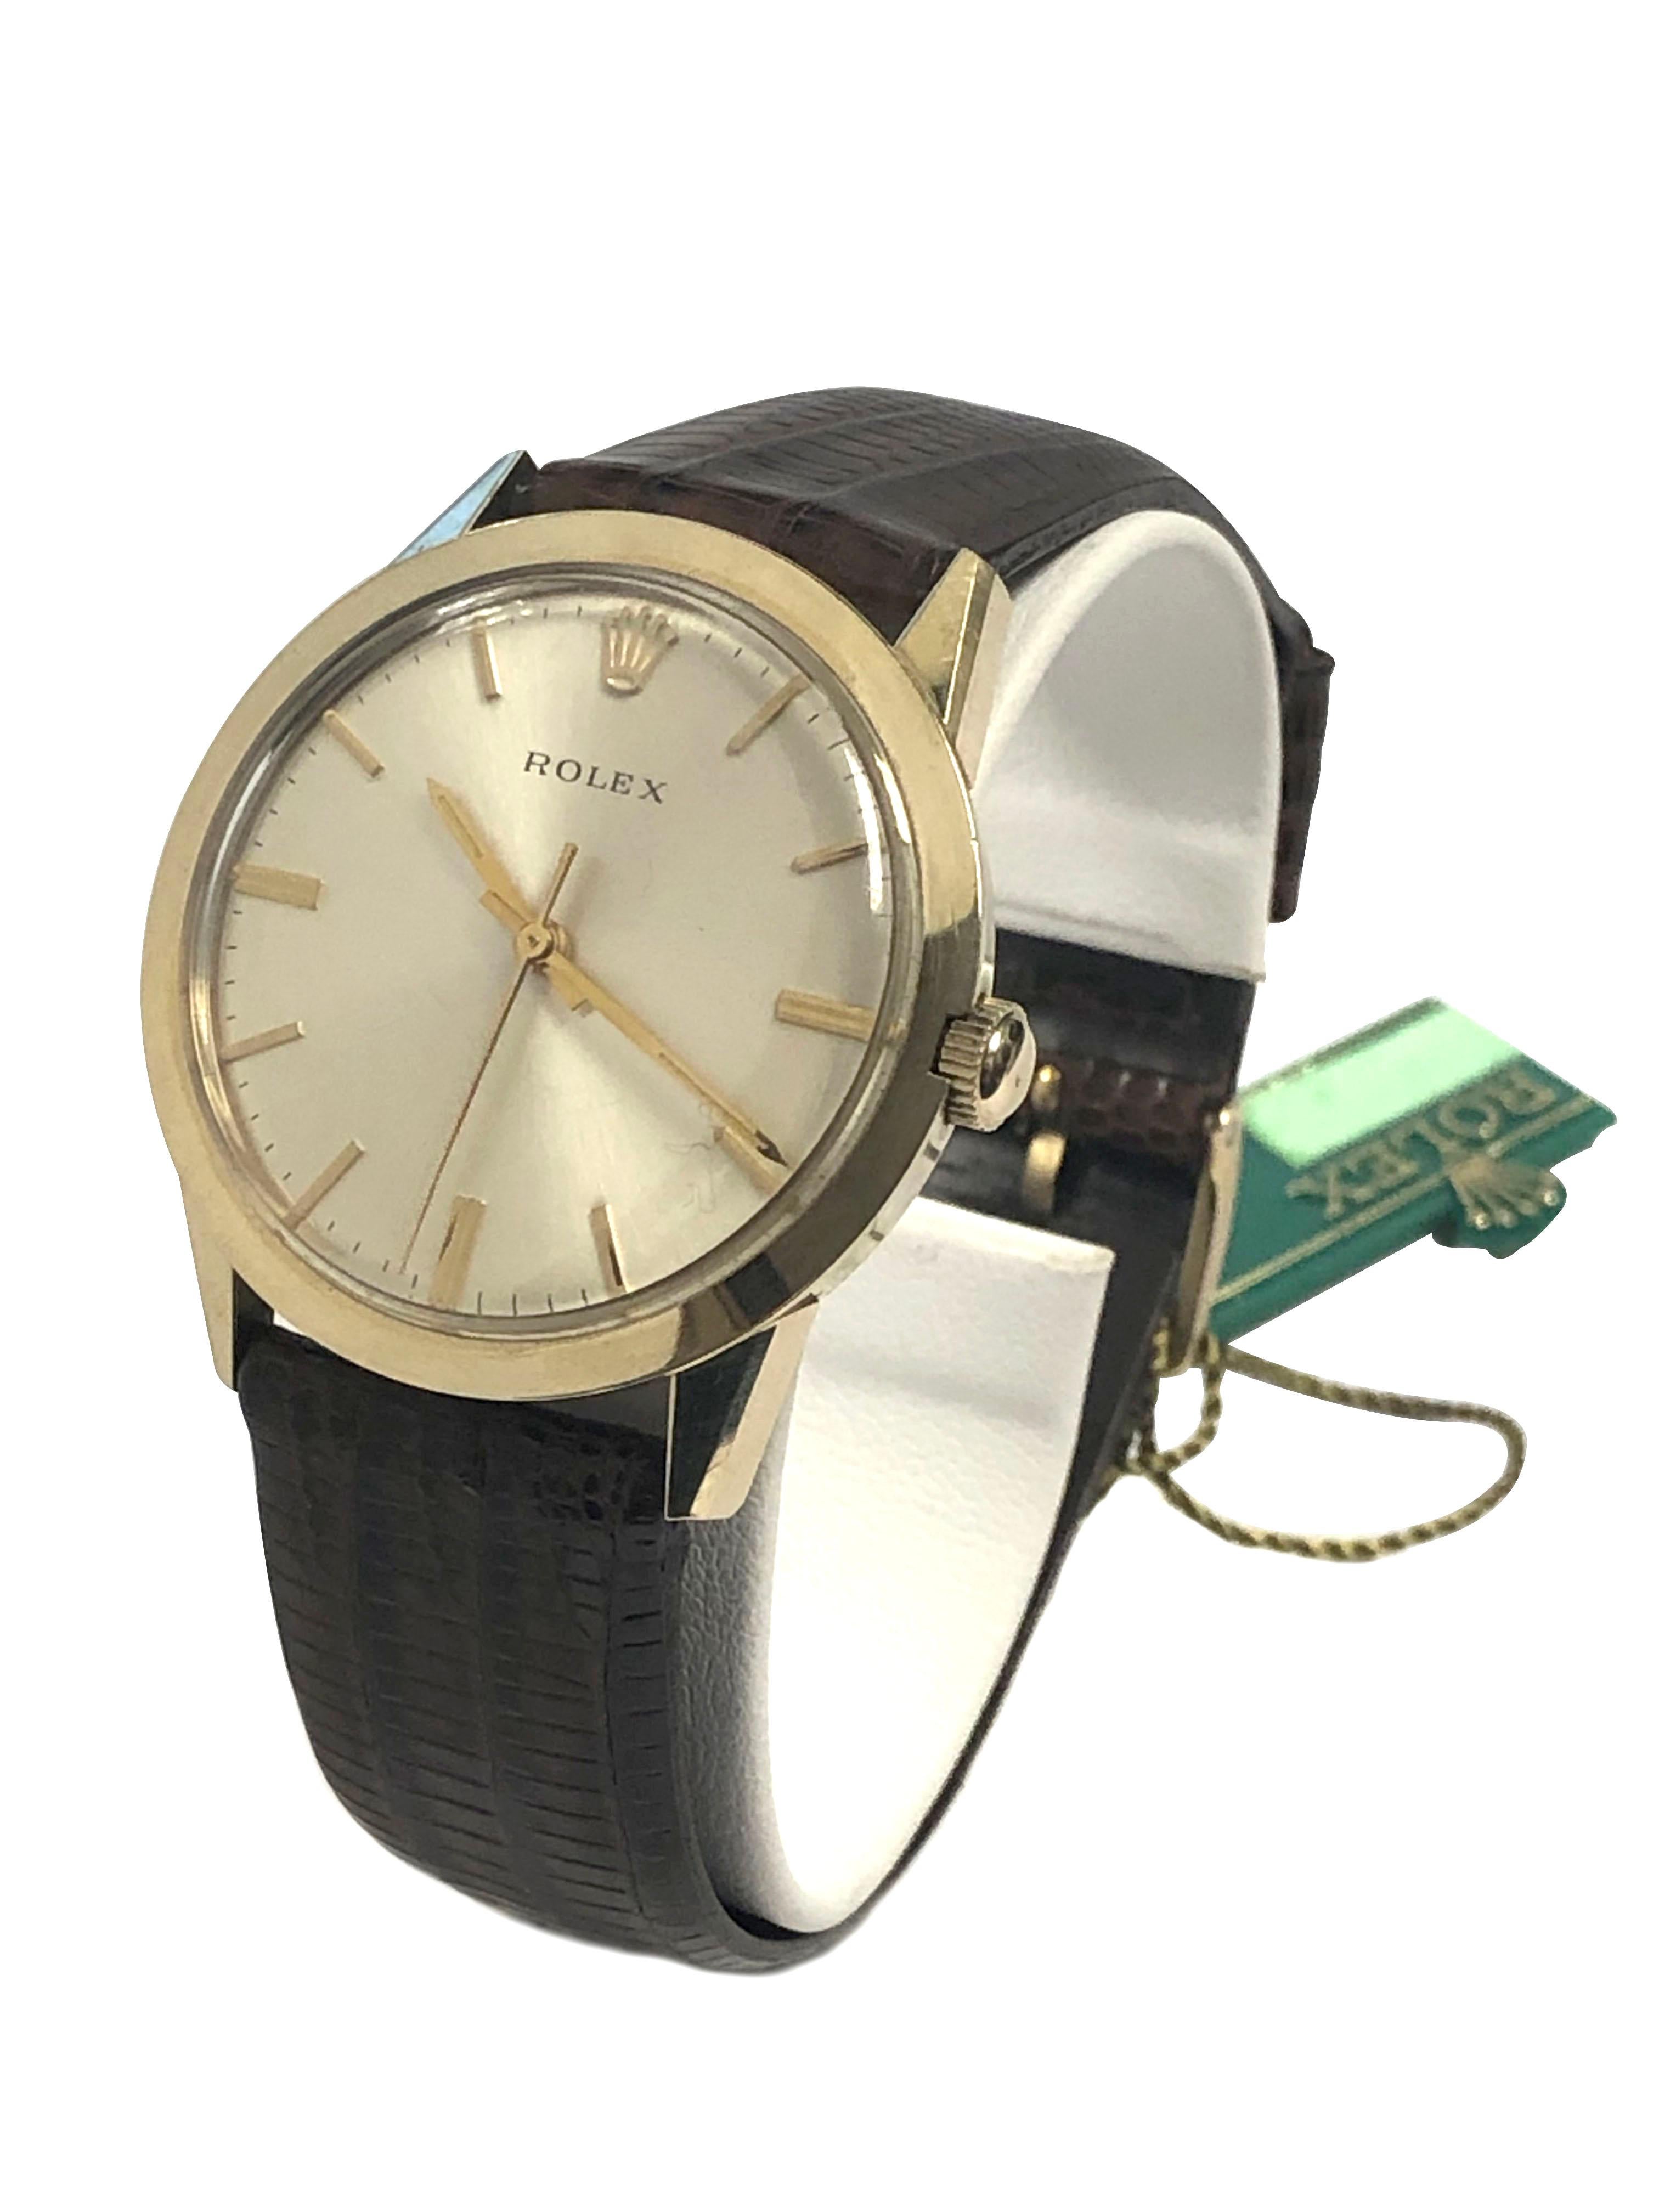 Circa 1970 Rolex Presentation Watch, 35 M.M. X 10 M.M. Thick 14k Yellow Gold Filled 2 piece case. Automatic self winding movement, silver satin dial with raised Gold markers and a center sweep hand, Brown Lizard Strap with Gold Filled Rolex Buckle.